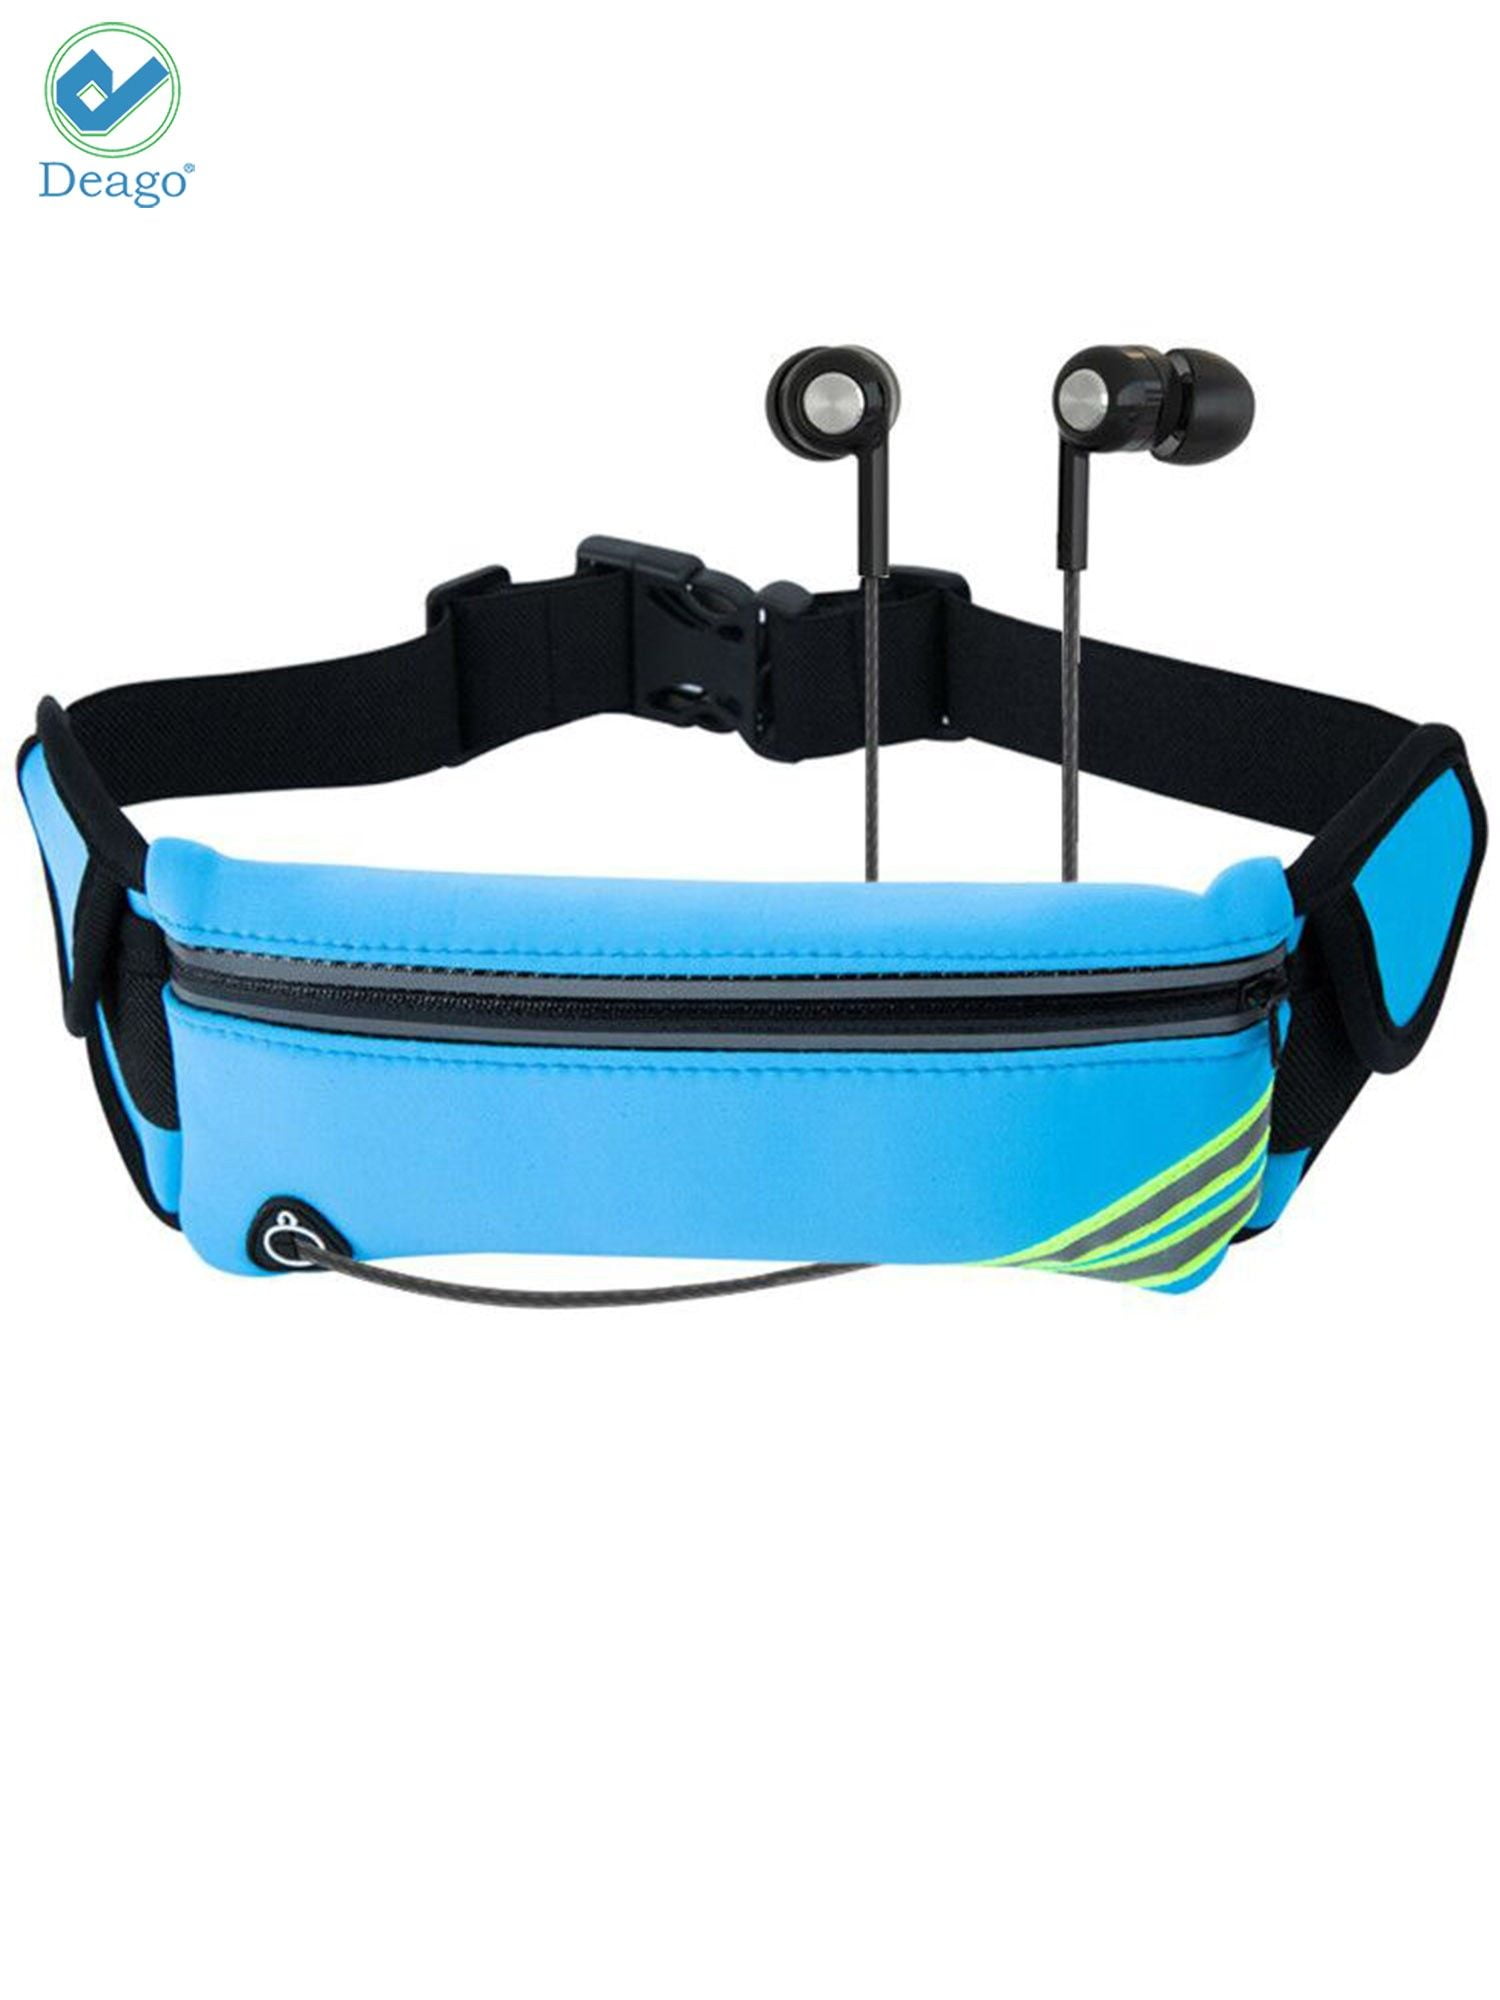 Deago No-Bounce Reflective Running Belt Pouch Fanny Pack,Unisex Water  Resistant Workout Waist Pack Bag for Fitness Jogging Hiking Travel,Cell  Phone